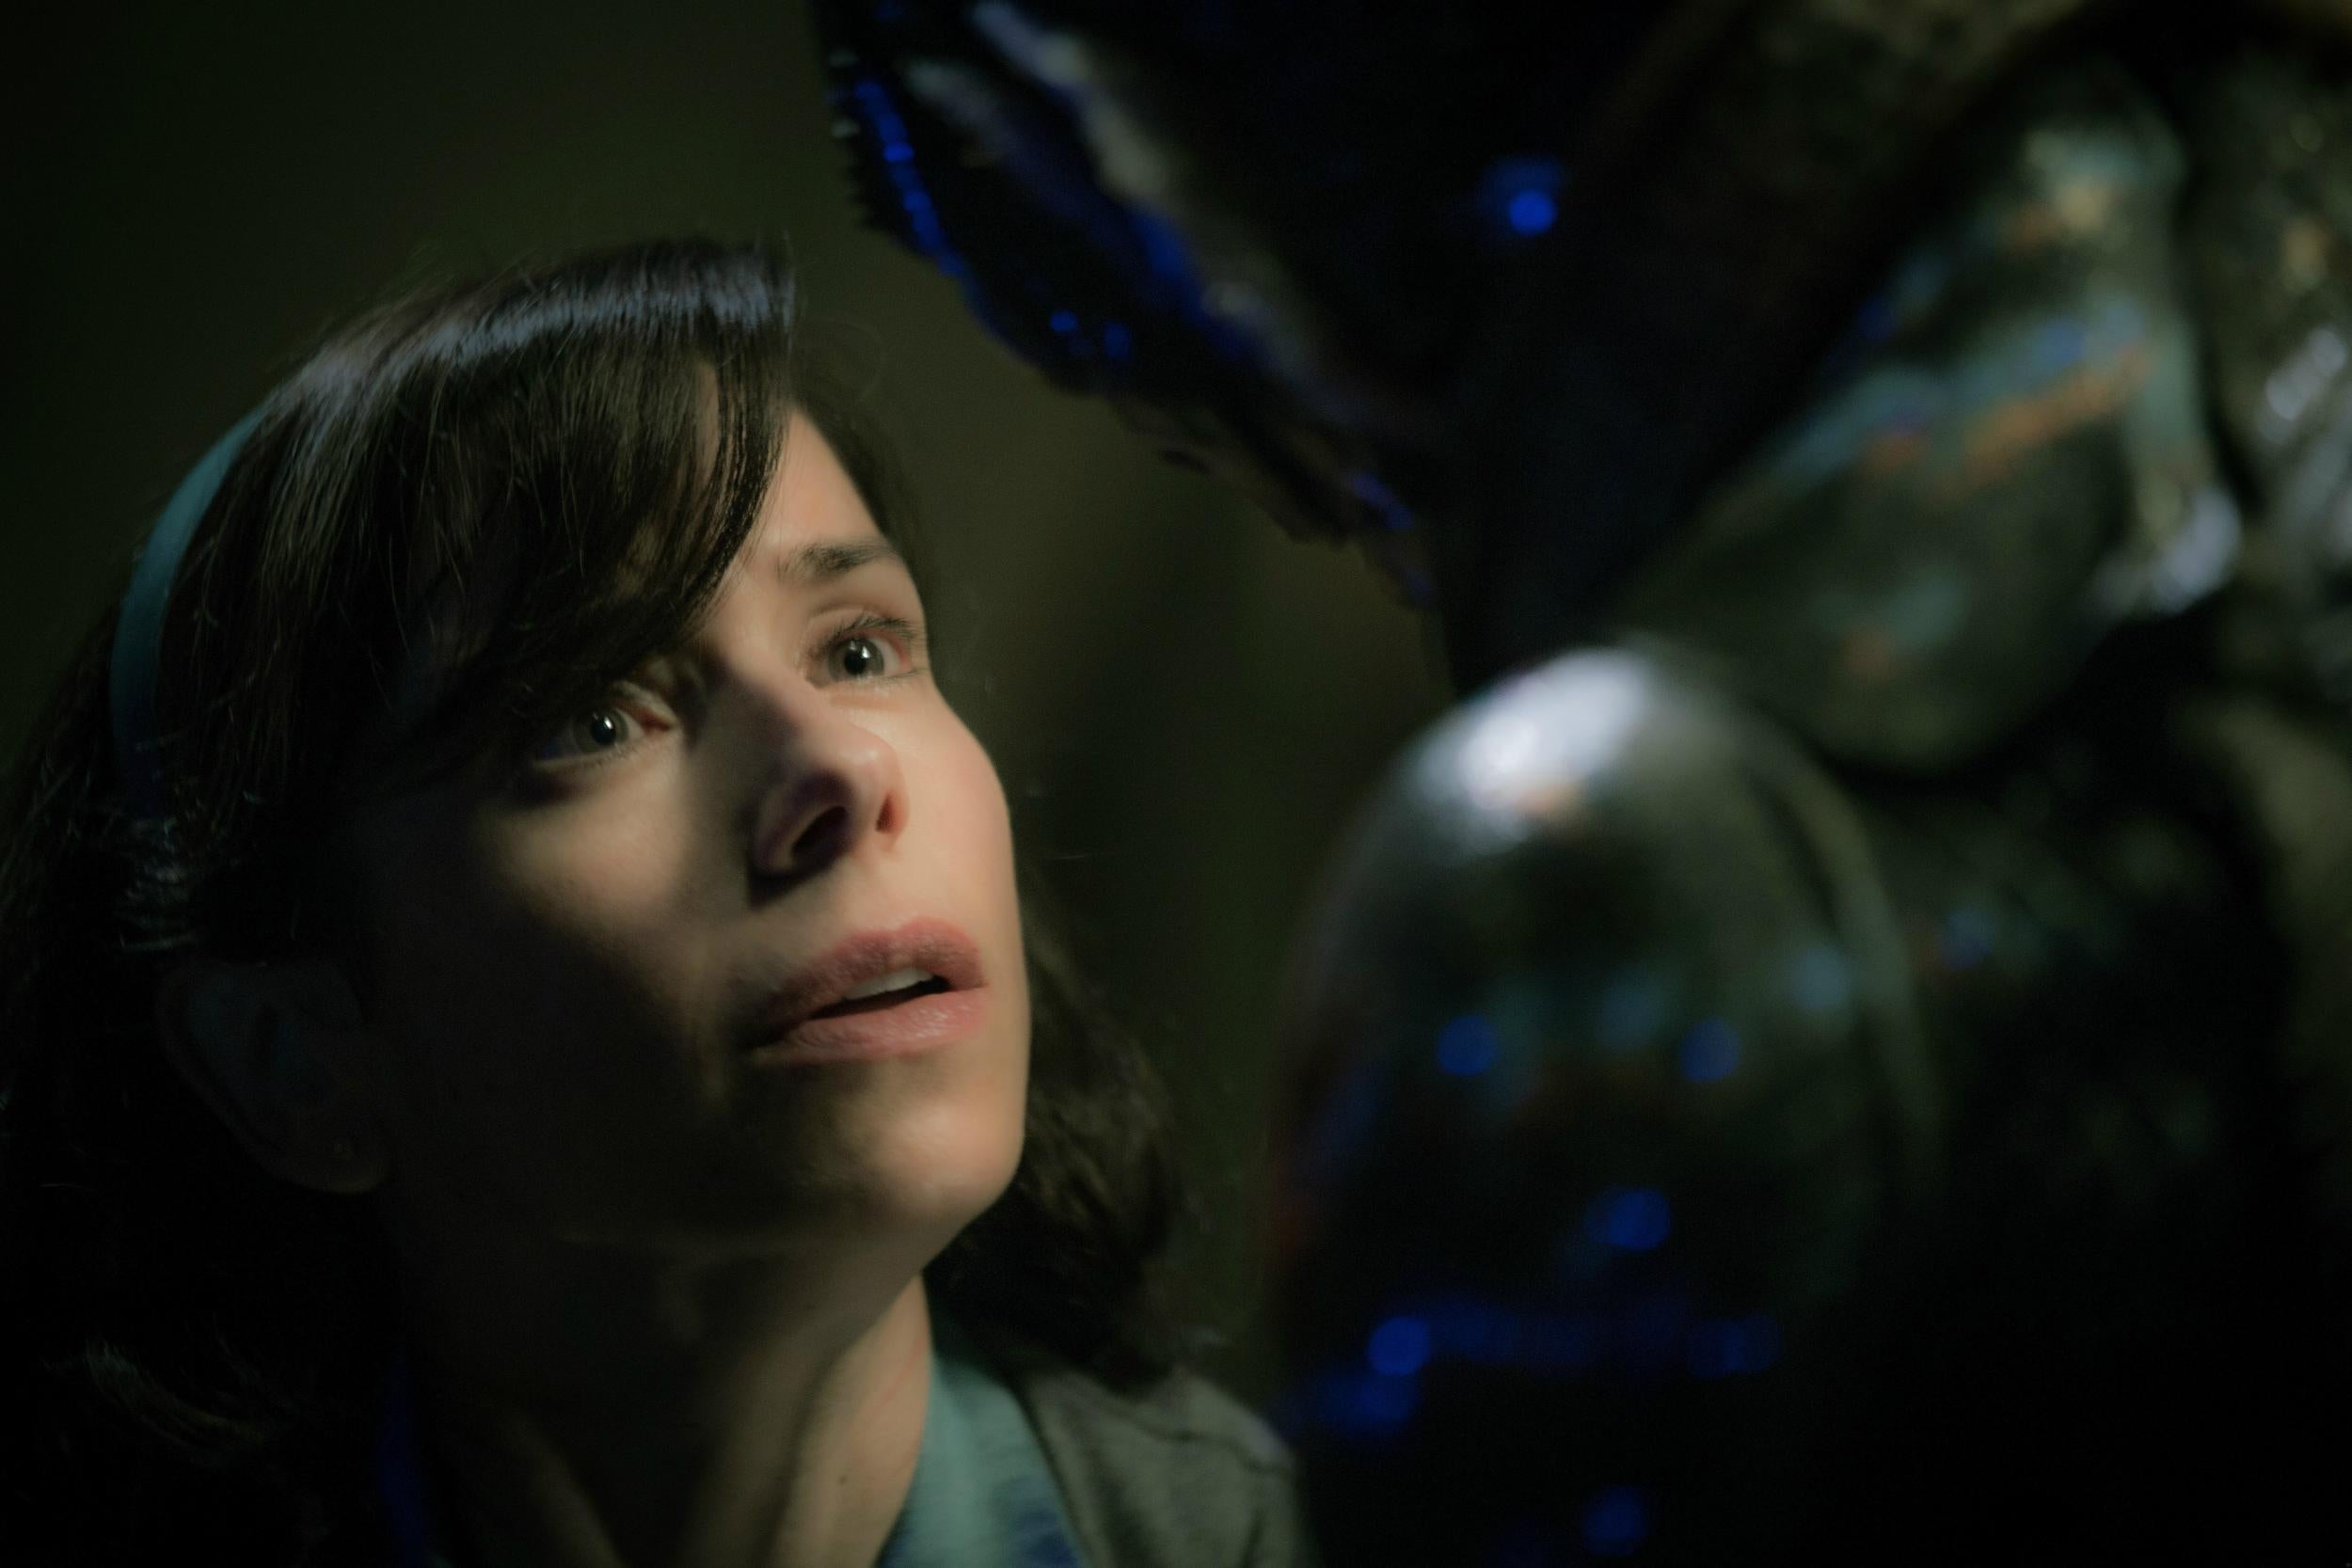 becci carroll recommends shape of water sucks pic